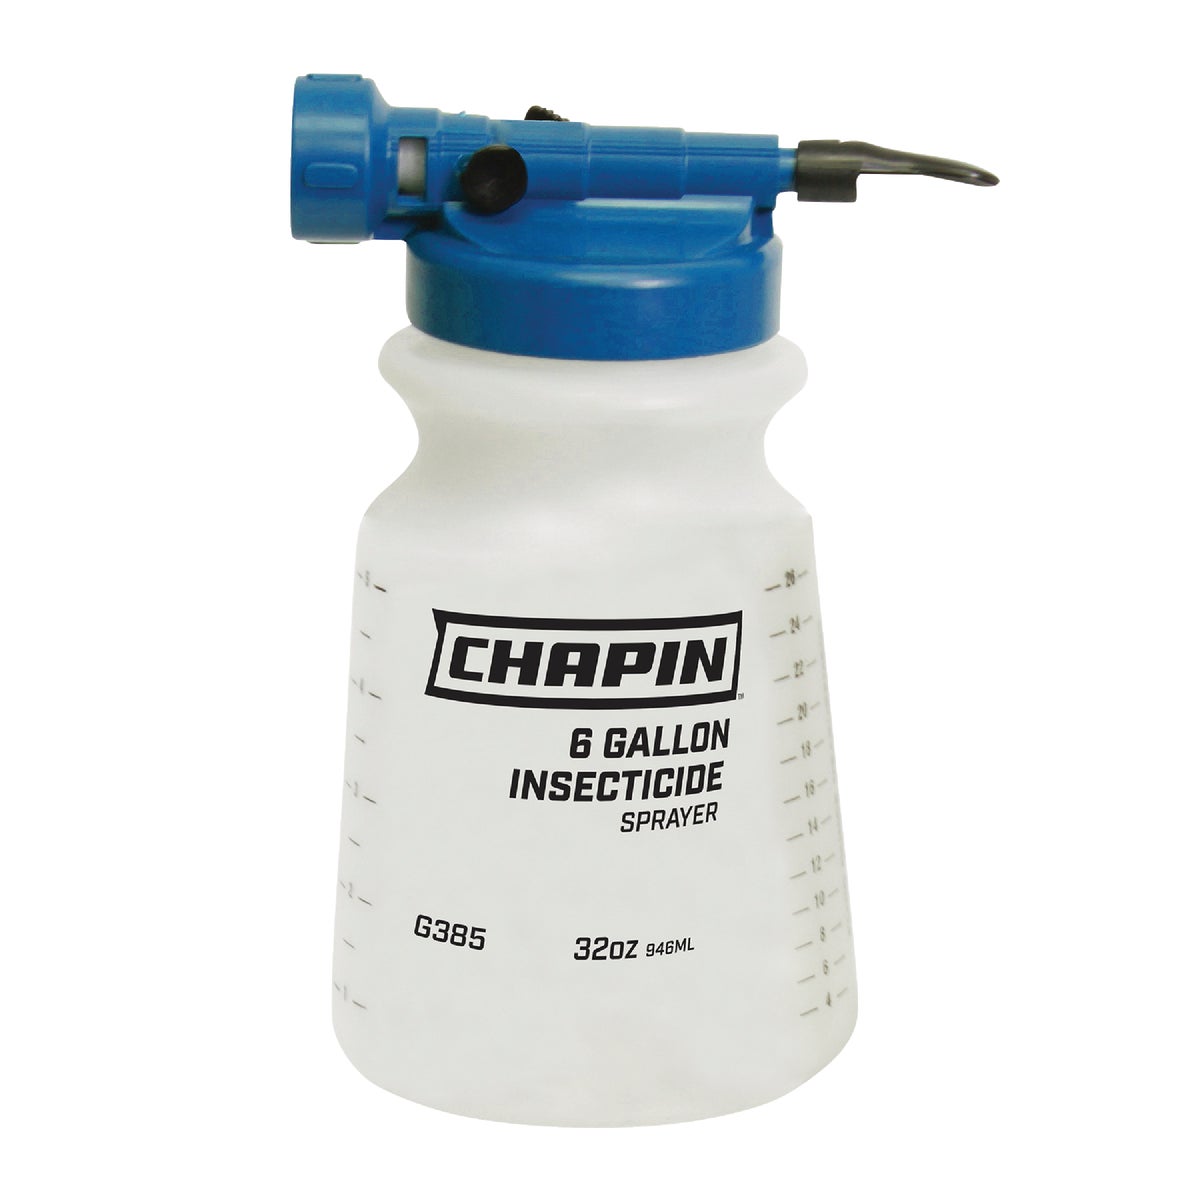 Chapin 32 Oz. Insecticide Hose End Sprayer